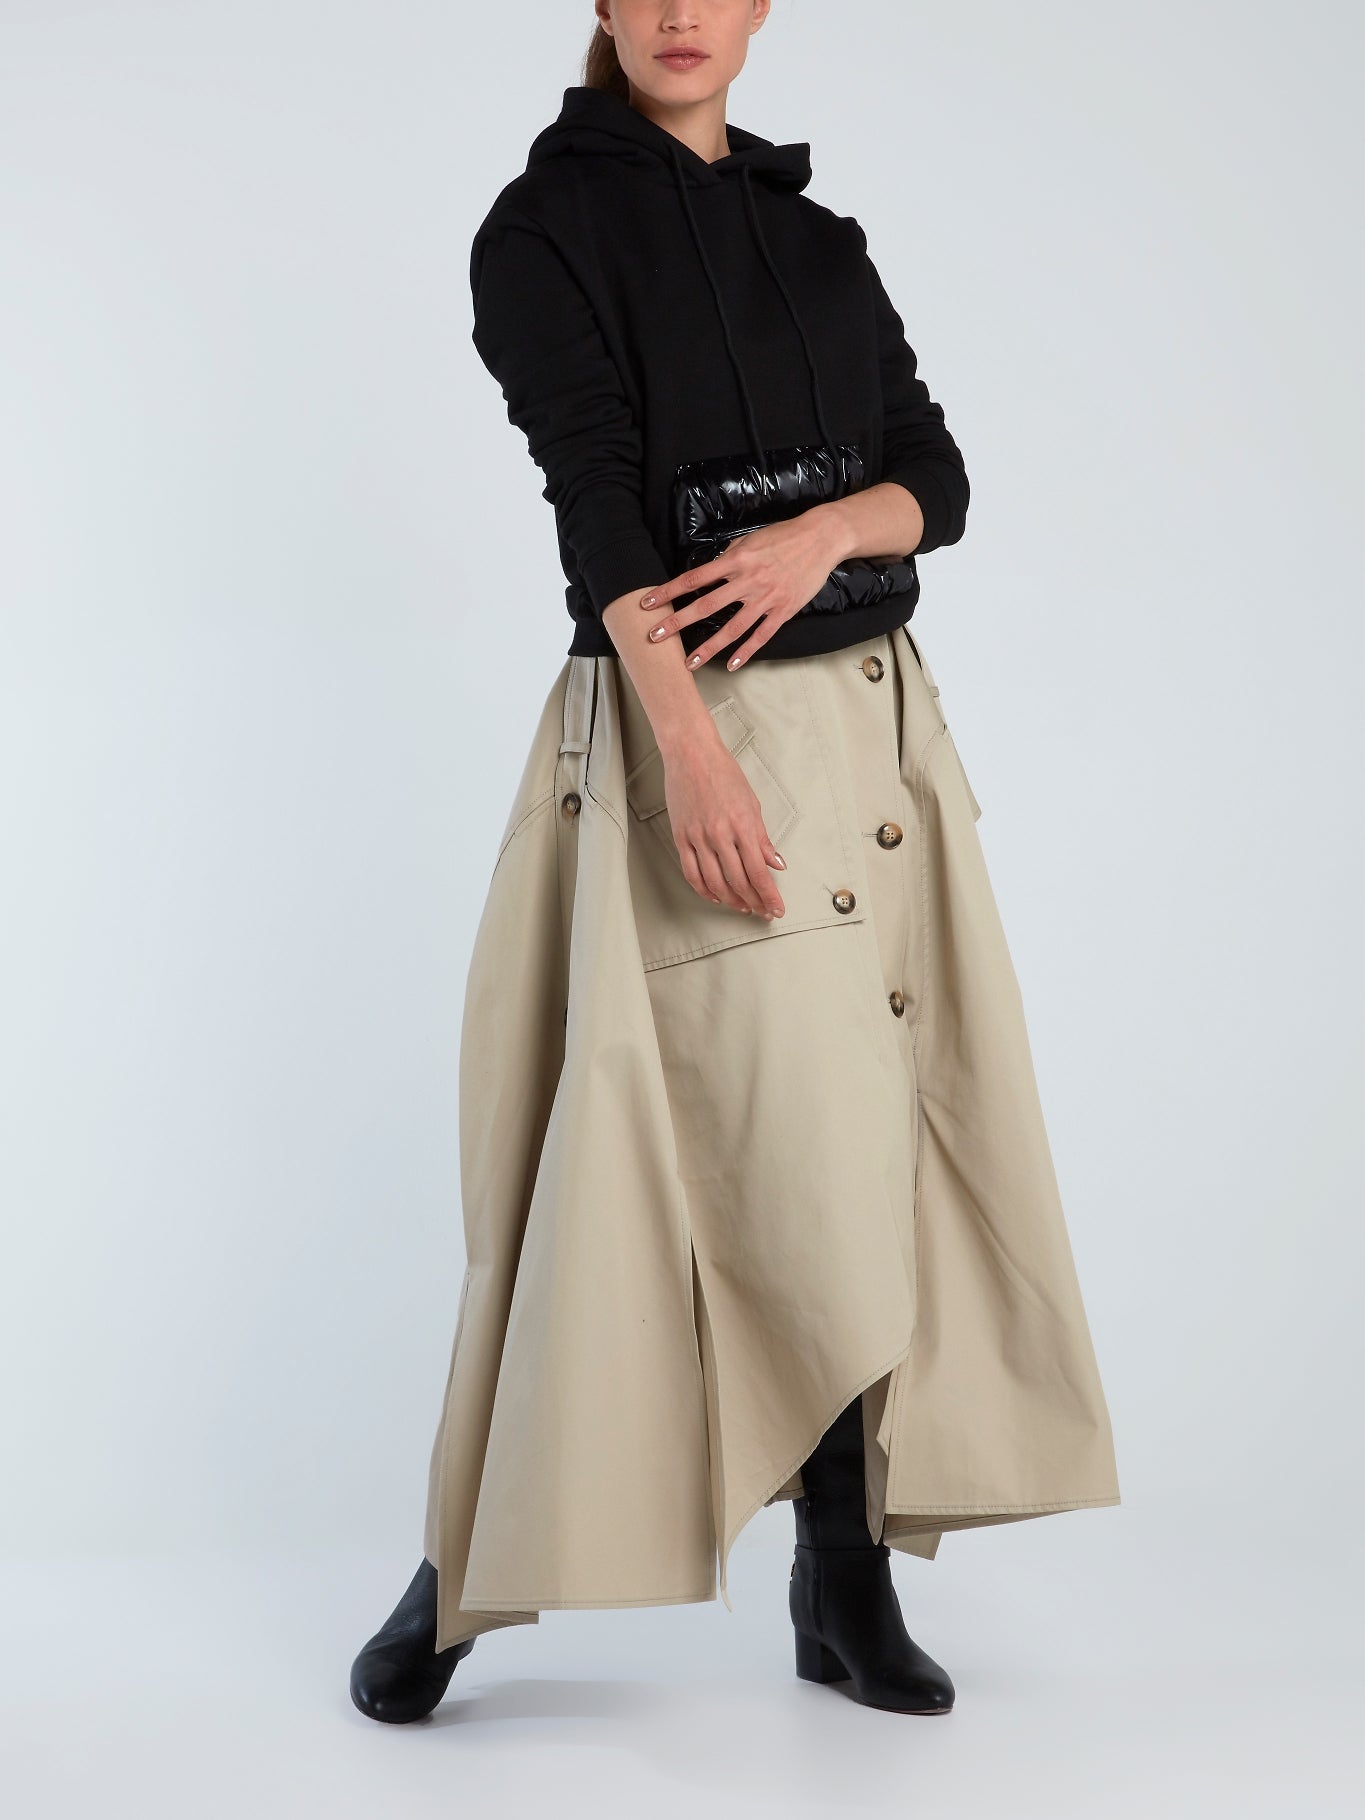 Maxi Global Store – Maison-B-More Reconstructed Trench Form Skirt